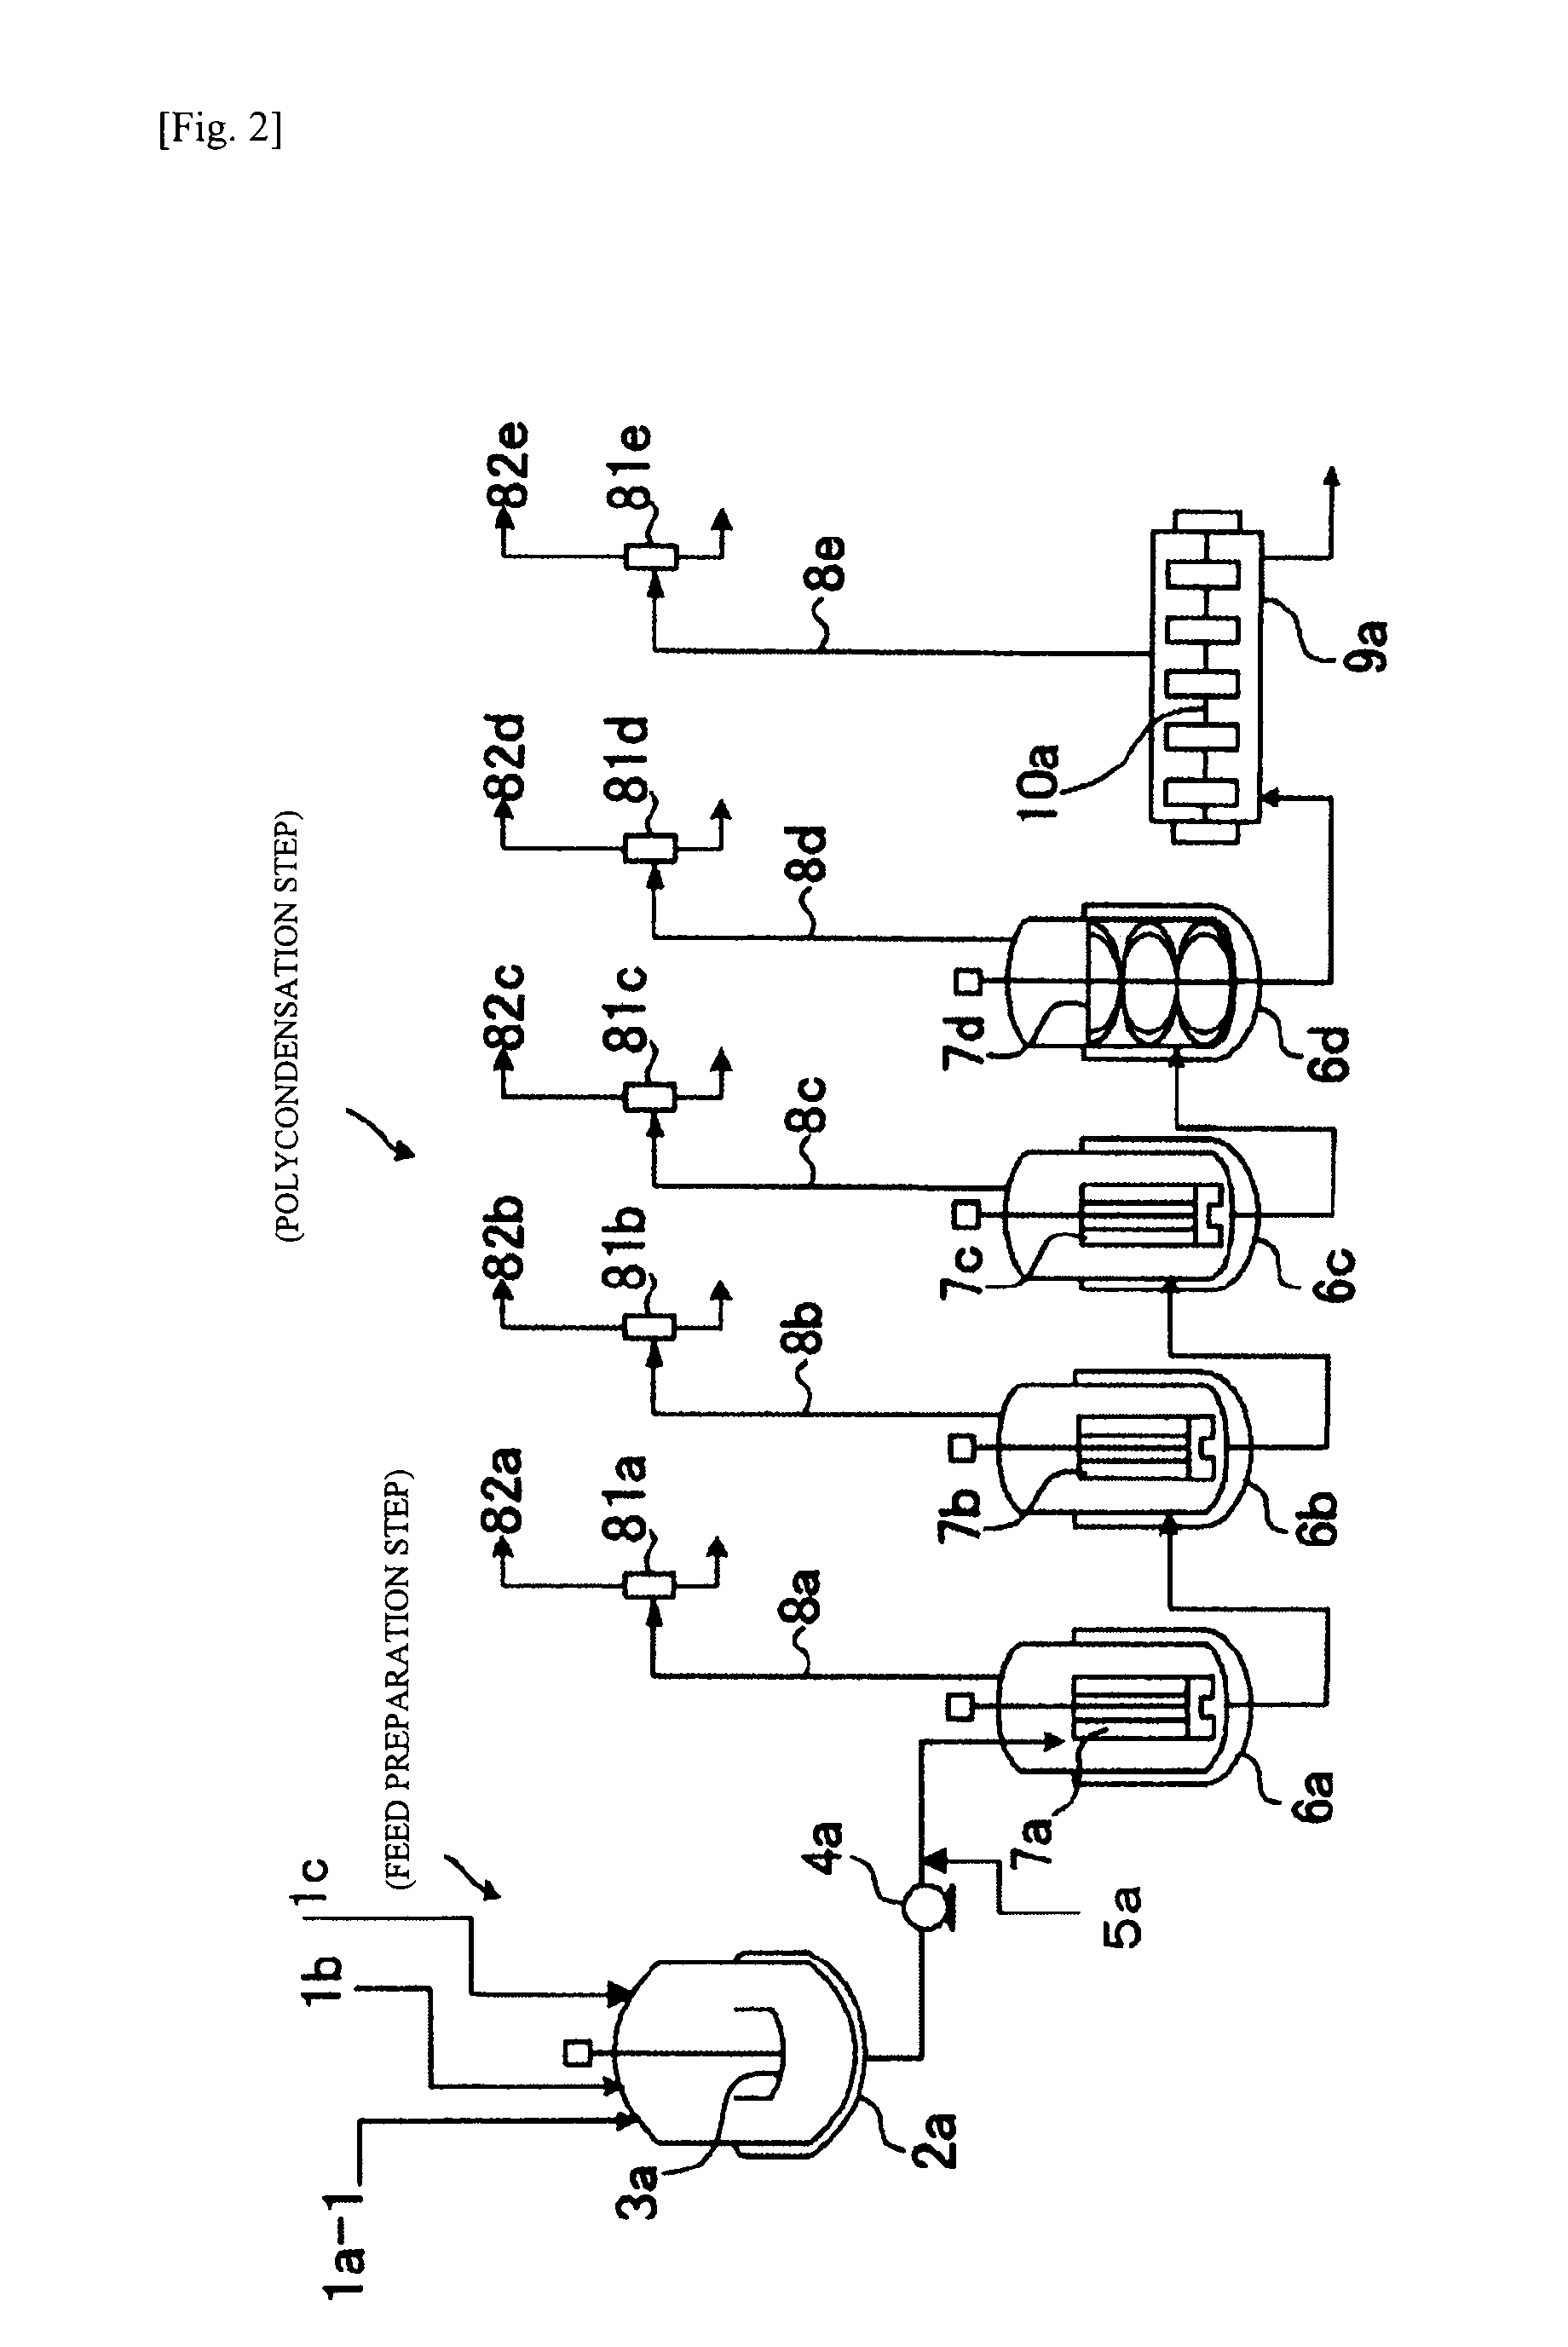 Process for producing polycarbonate